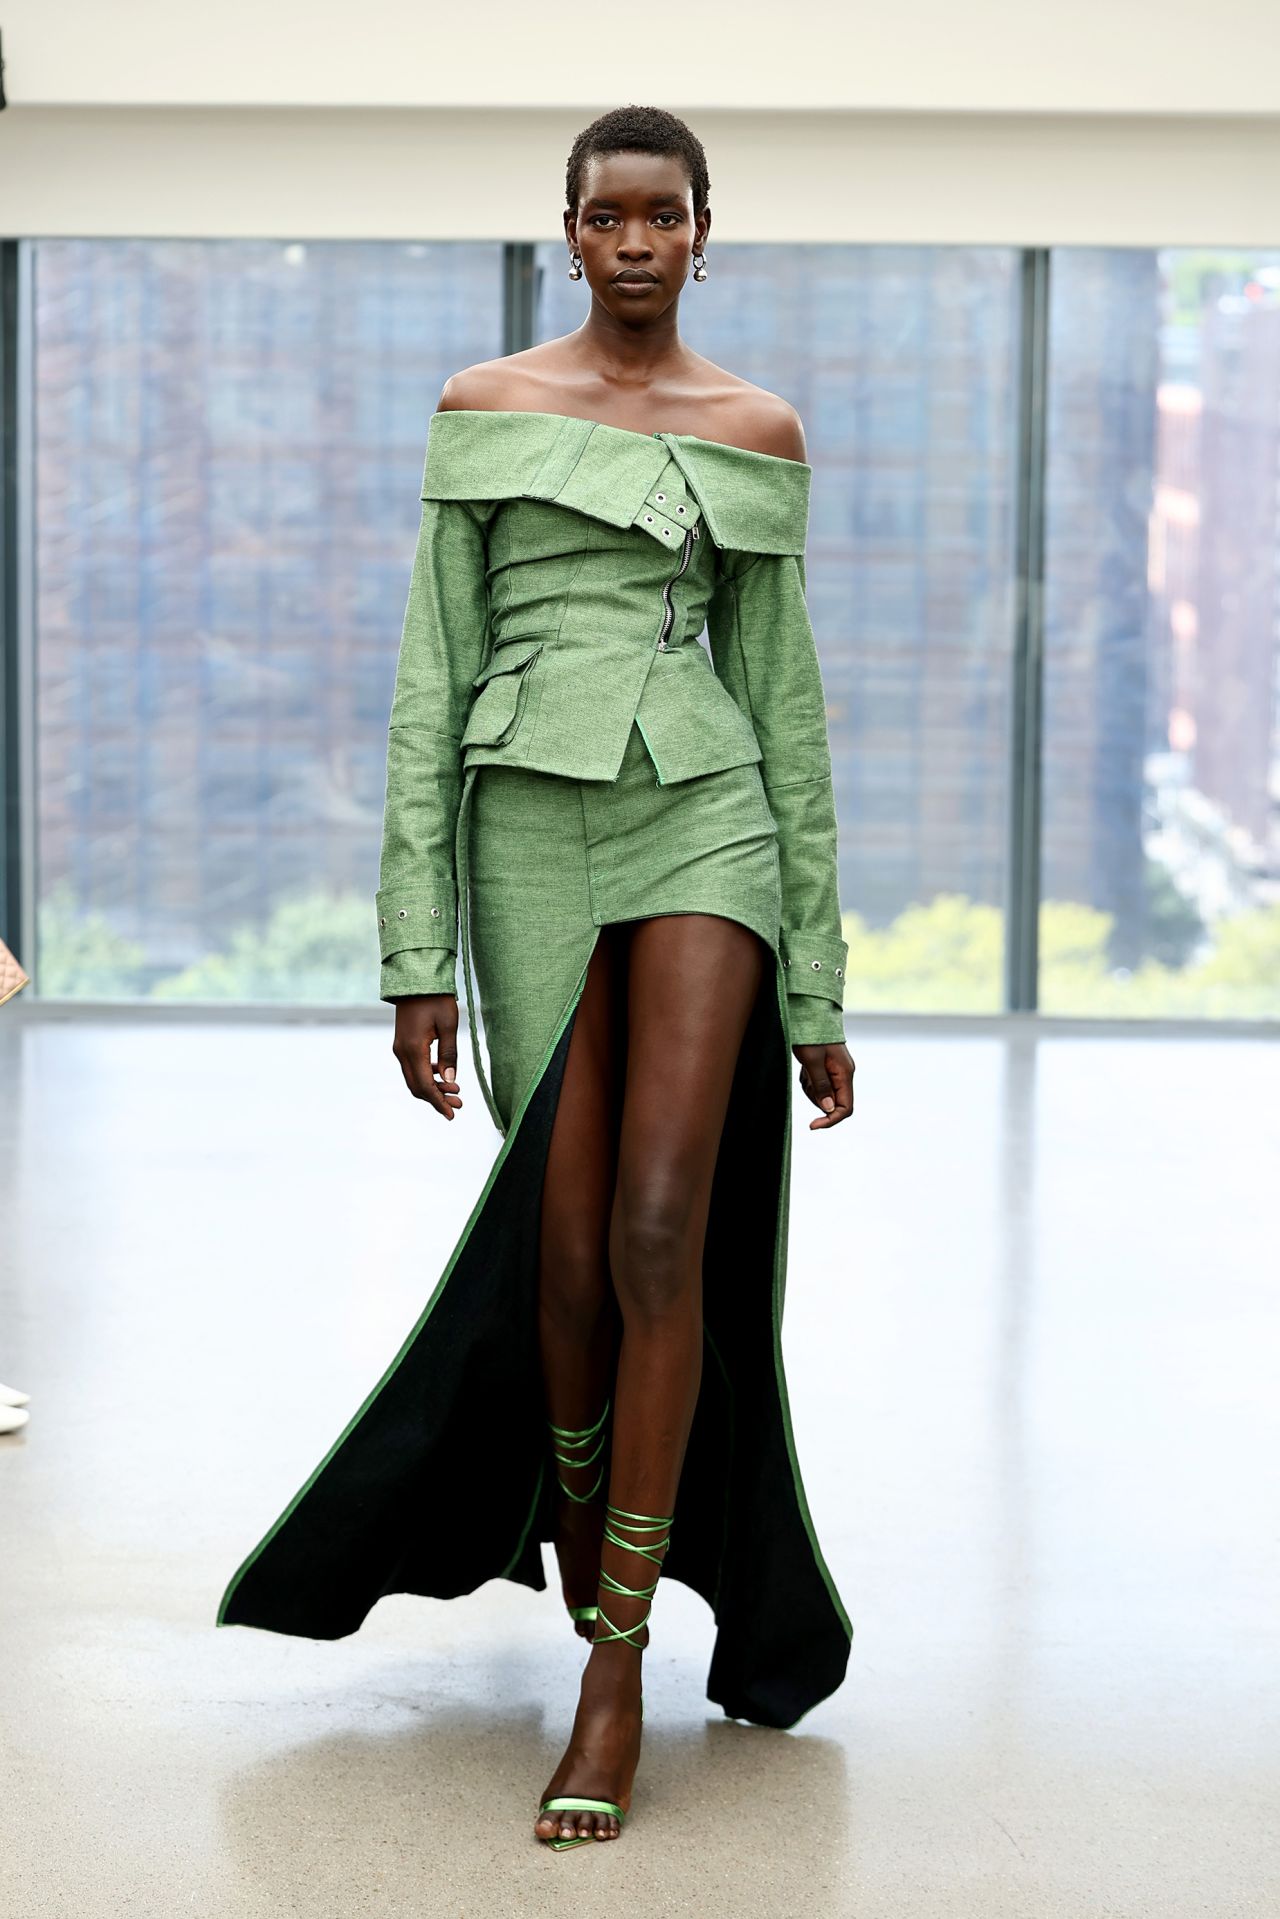 NEW YORK, NEW YORK - SEPTEMBER 12: A model walks the runway at the Bishme Cromartie fashion show during New York Fashion Week - September 2023: The Shows at Mezzanine at Spring Studios on September 12, 2023 in New York City. (Photo by Arturo Holmes/Getty Images for NYFW: The Shows )